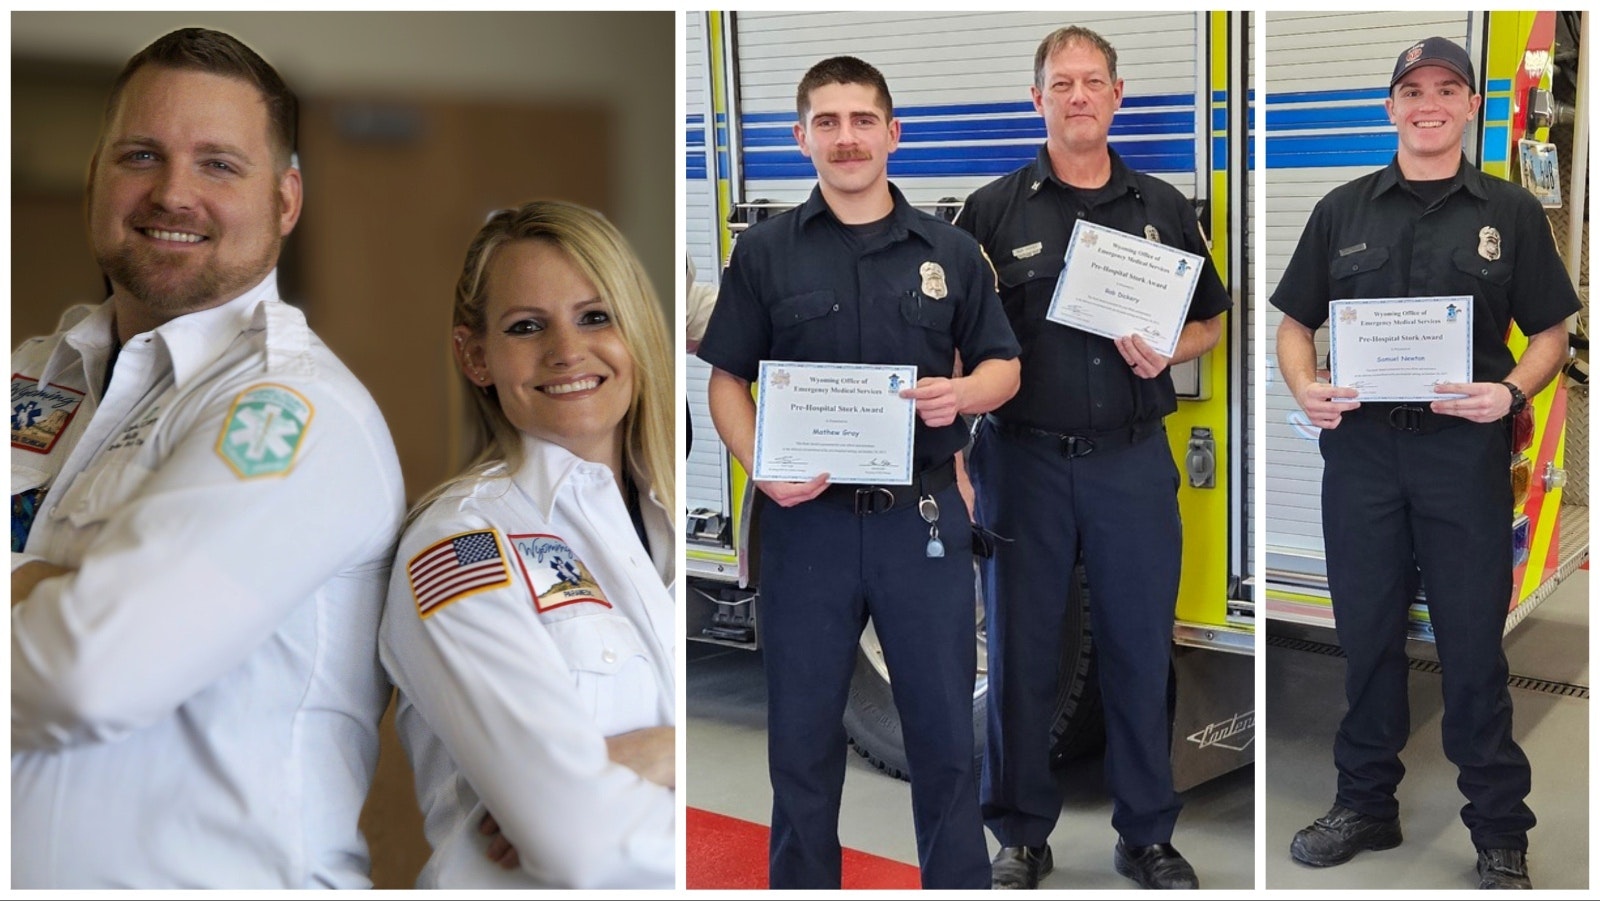 Left, EMT Duane Barker and Paramedic Lisa Gunyan were awarded the Stork Award after a recent field delivery in Gillette. Center and right, Campbell County Fire Department Engineer Matthew Gray, from left, Capt. Rob Dickey and firefighter Sam Newton. All were recently awarded STORK Awards after assisting in the field delivery of a newborn child.